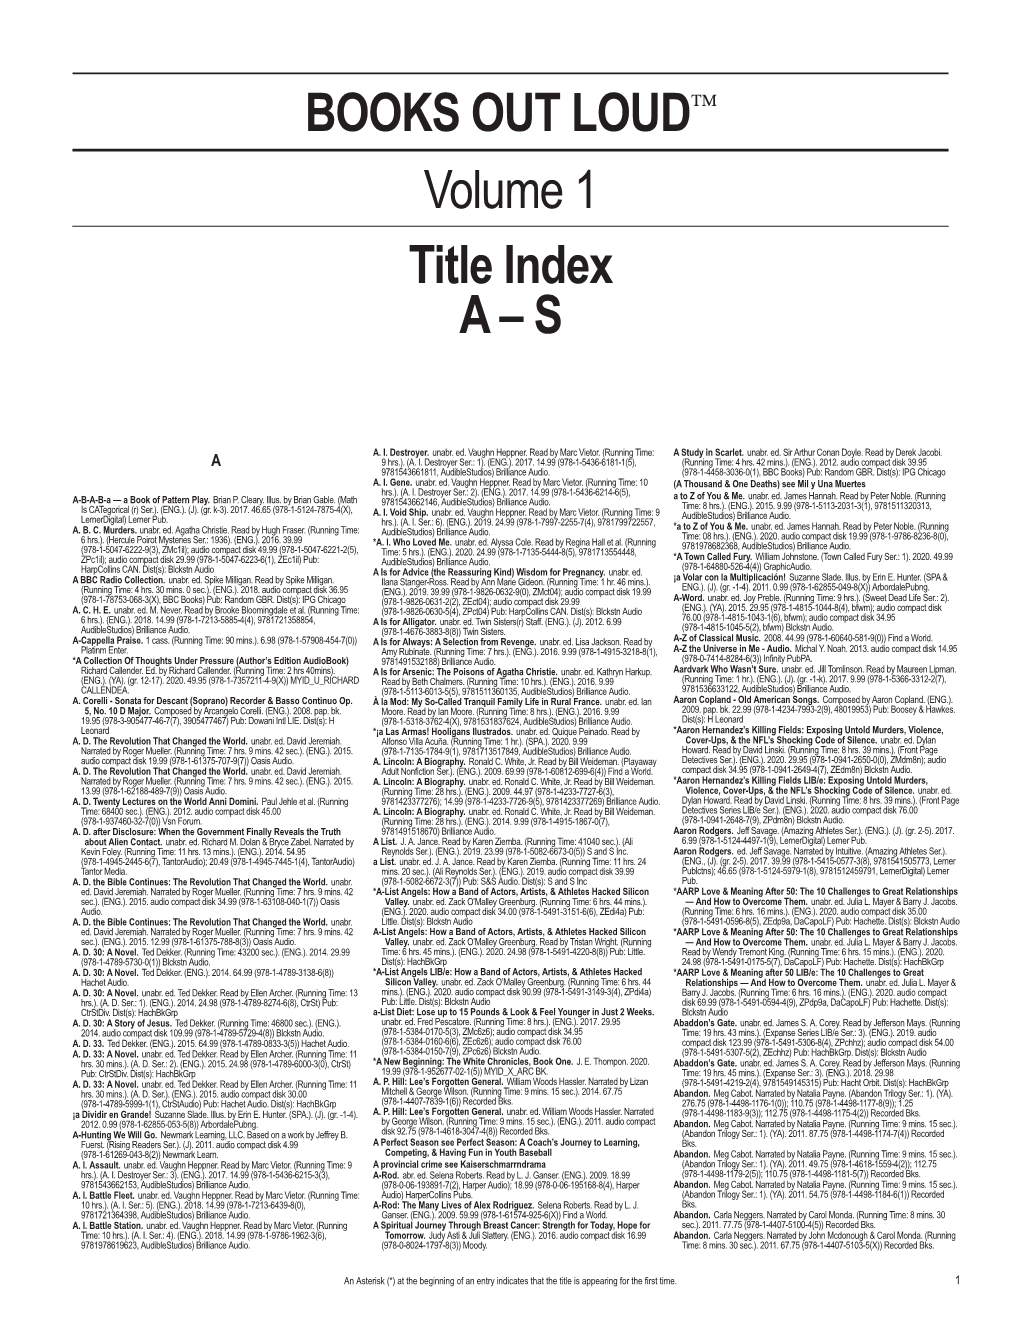 BOOKS out LOUD Volume 1 Title Index